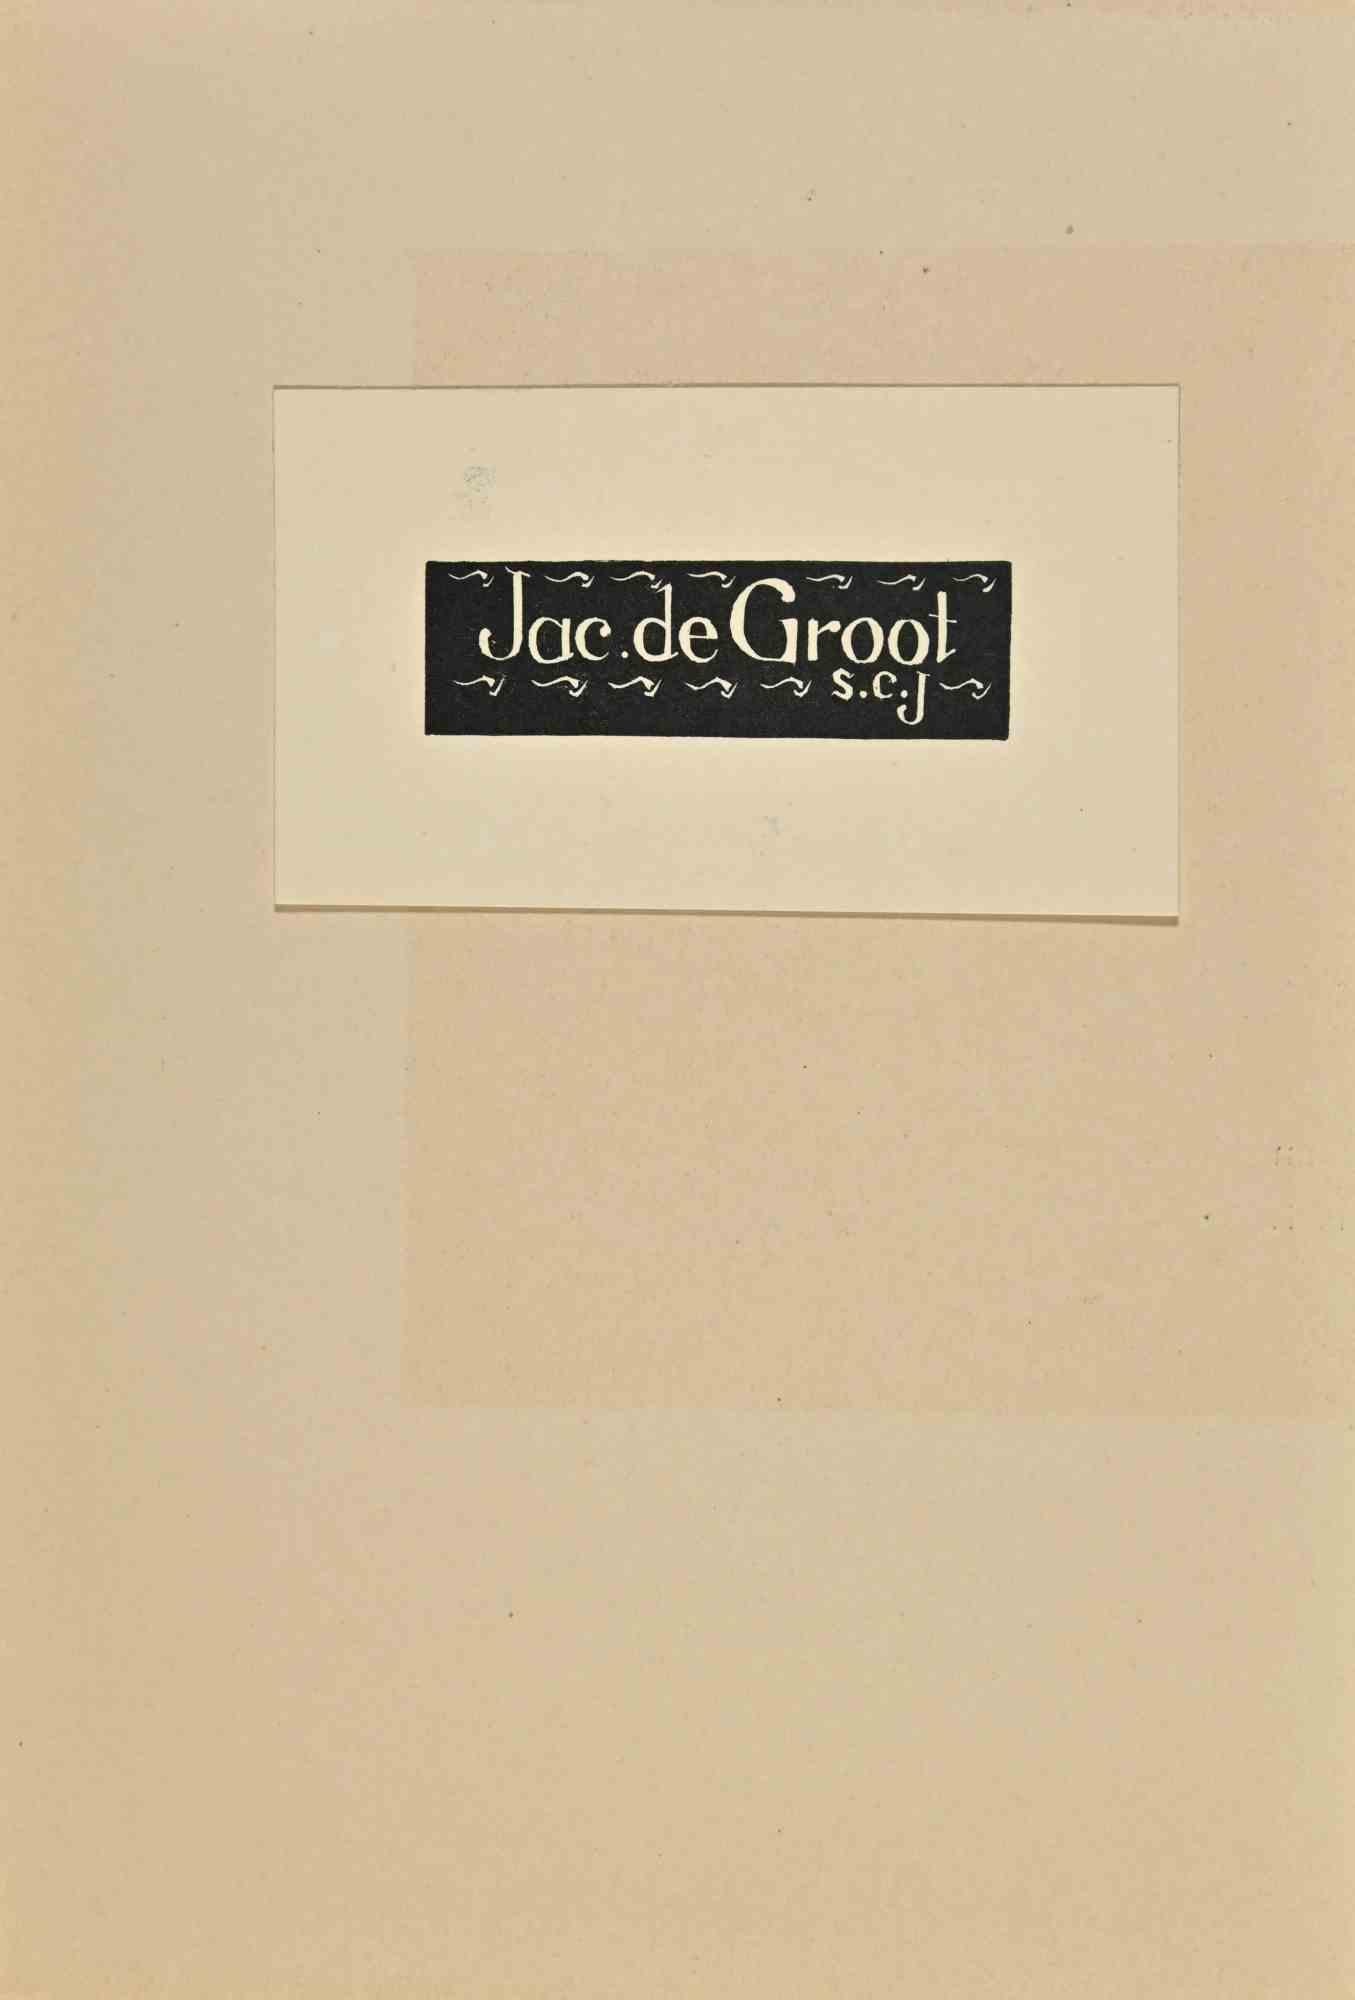 Ex-Libris  - Jac de Groot is an Artwork realized in 1935 by A. Schellart.

Woodcut B./W. print on ivory paper. The work is glued on ivory cardboard. Signed on plate and dated on back.

Total dimensions: 20 x 14 cm.

Good conditions.

The artist